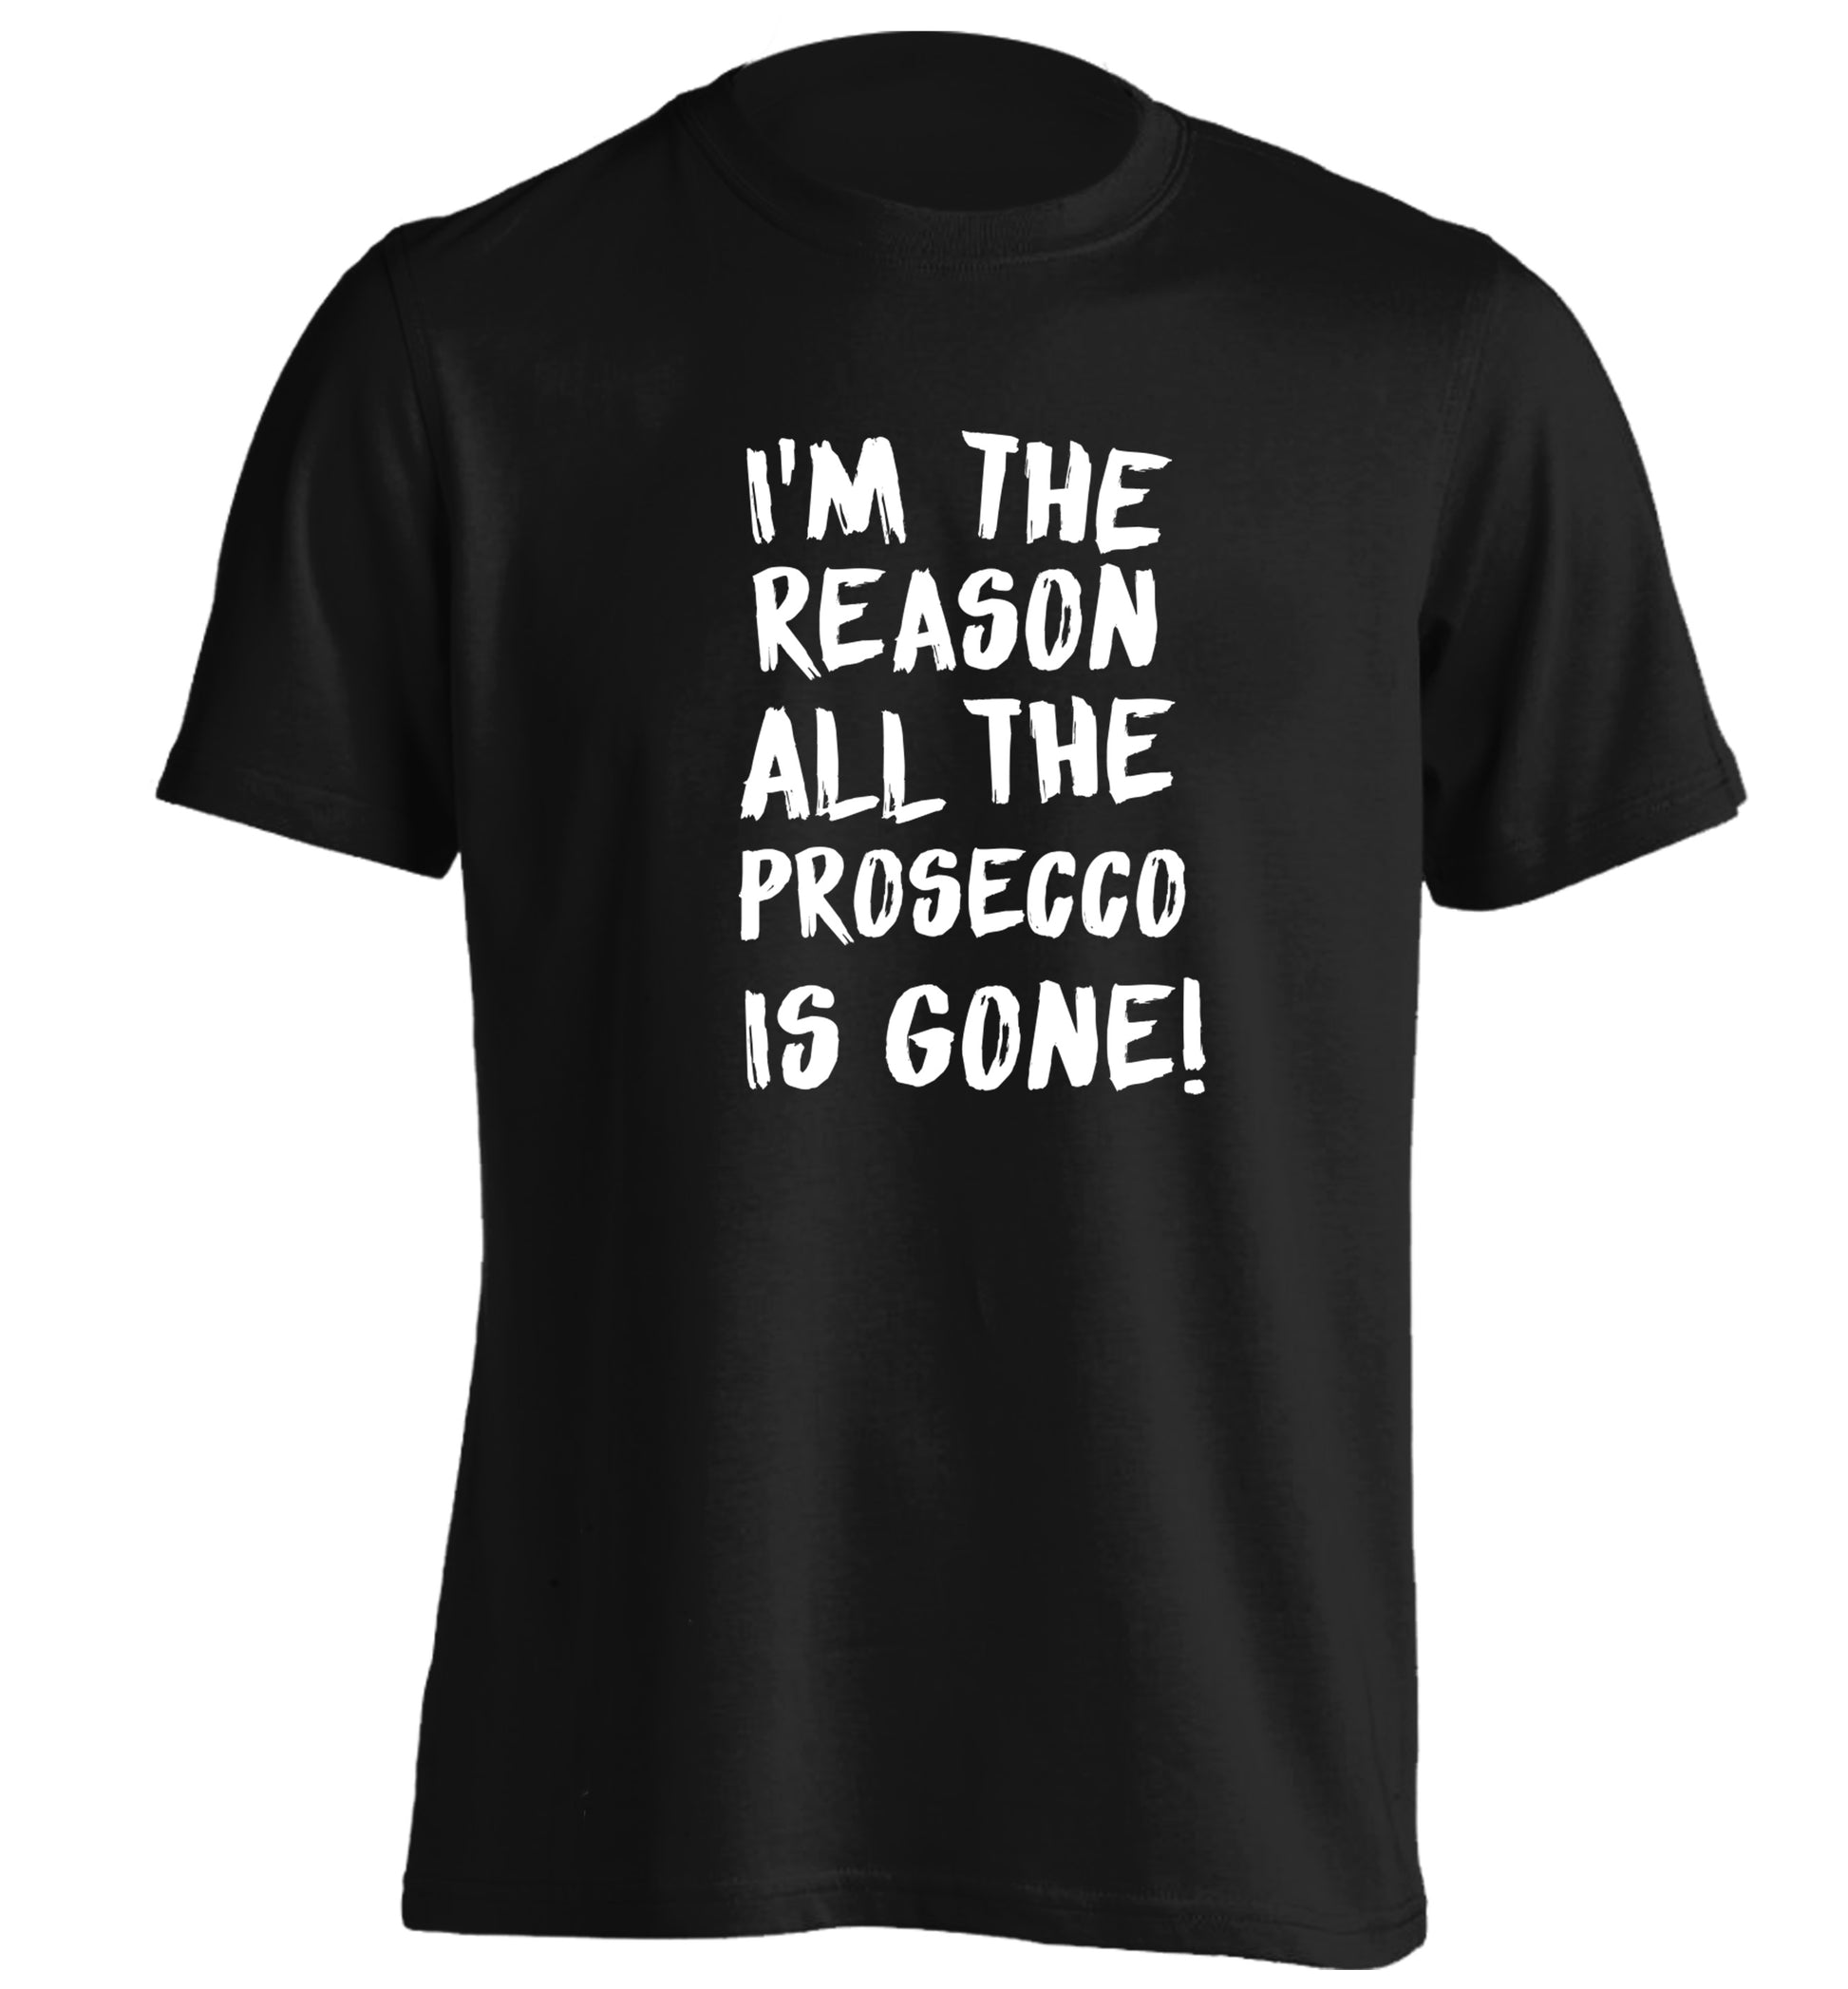 I'm the reason all the prosecco is gone adults unisex black Tshirt 2XL